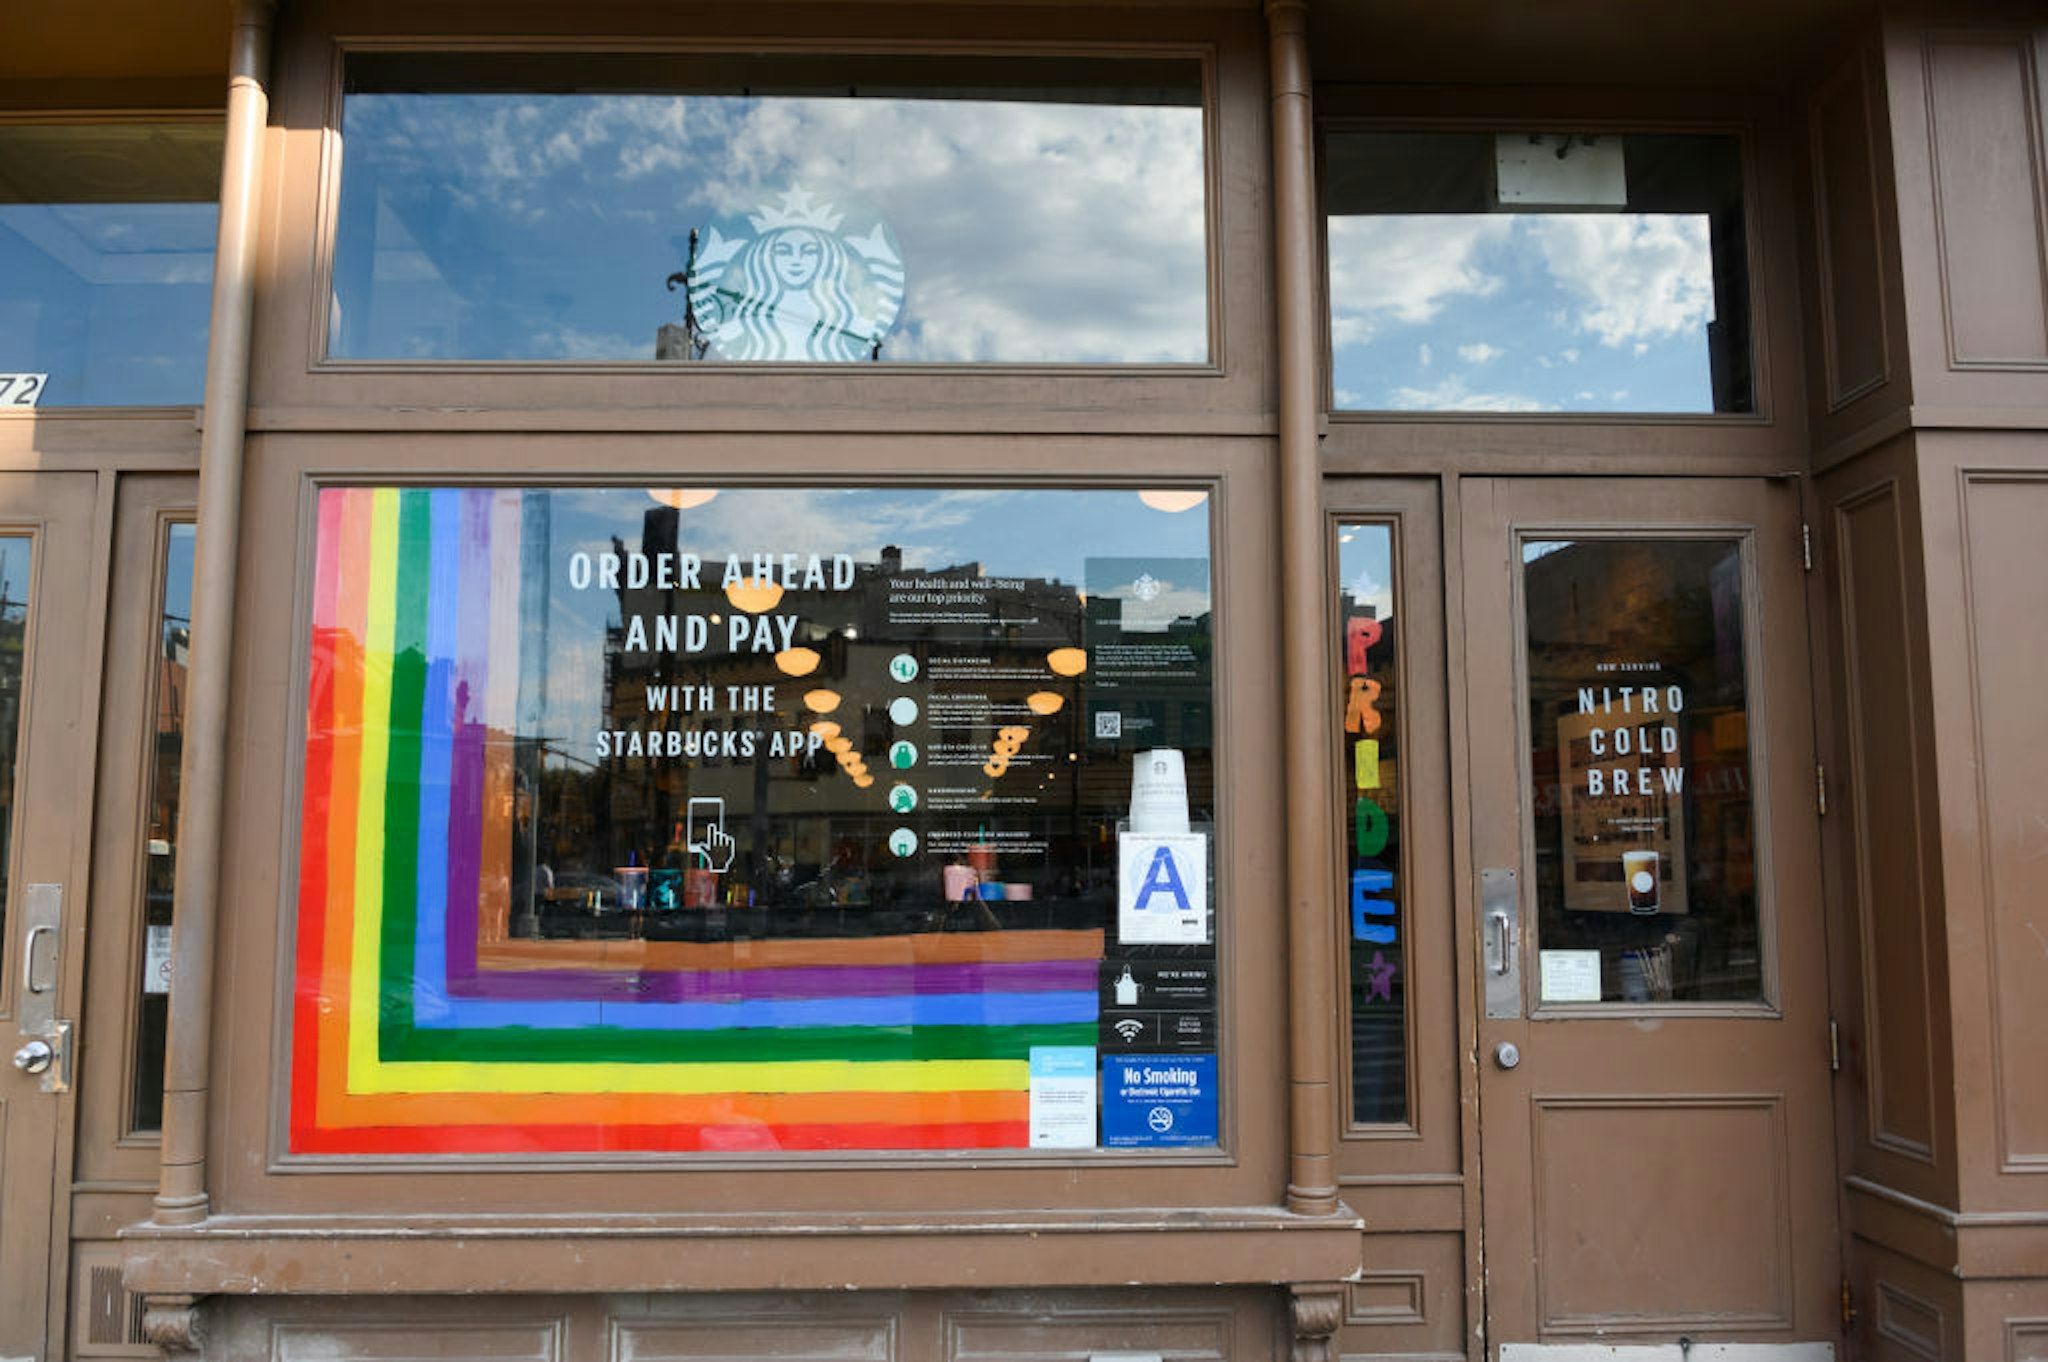 NEW YORK, NEW YORK - JUNE 26: Rainbow art is seen outside Starbucks in the West Village on June 26, 2020 in New York City. Due to the ongoing Coronavirus pandemic, this year's pride march had to be canceled over health concerns. The annual event, which sees millions of attendees, marks its 50th anniversary since the first march following the Stonewall Inn riots. (Photo by Noam Galai/Getty Images)